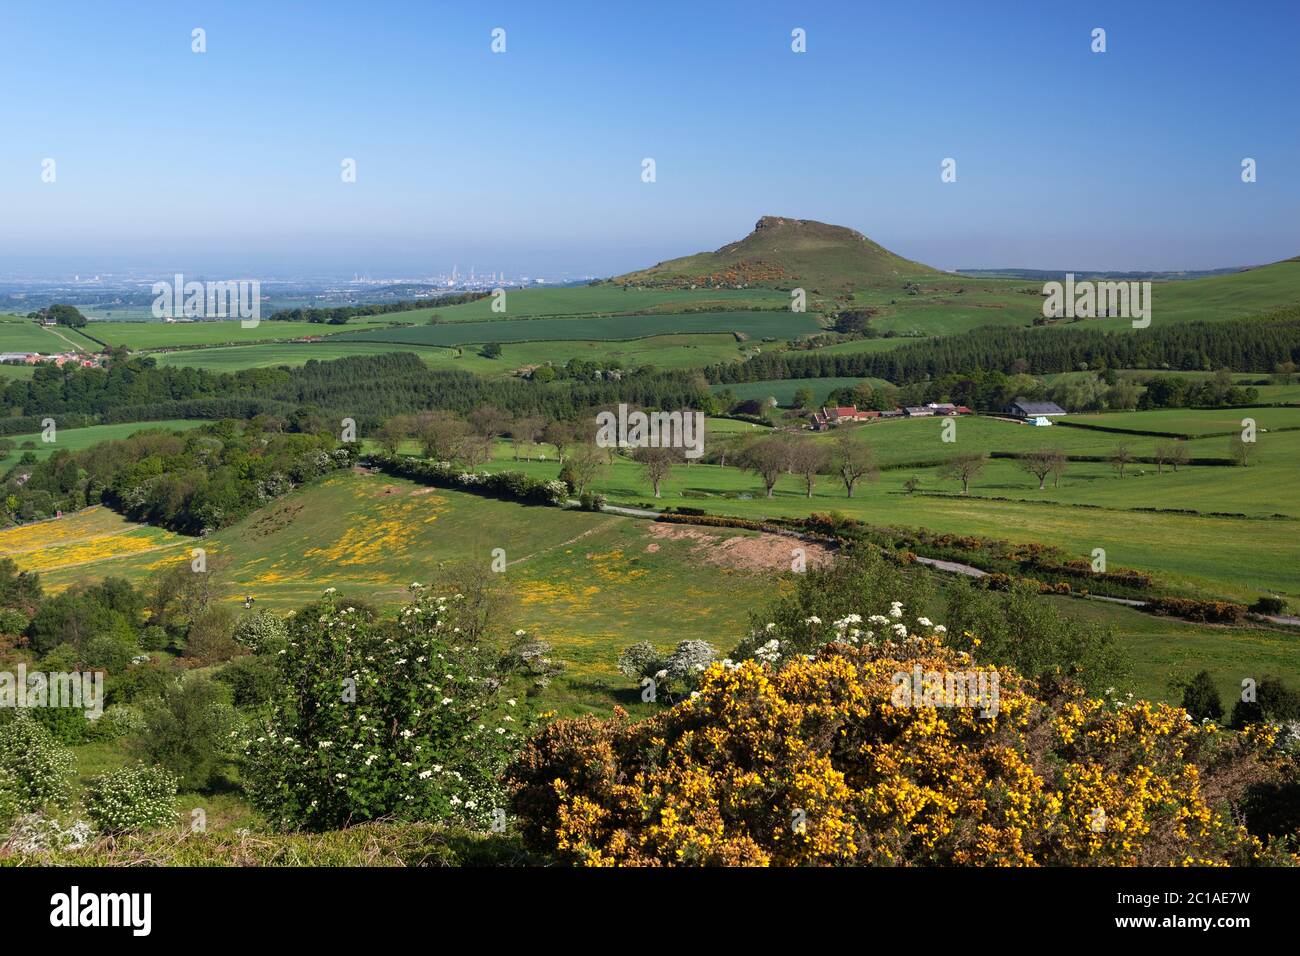 View over Roseberry Topping in the North Yorks National Park, Great Ayton, North Yorkshire, England, United Kingdom, Europe Stock Photo